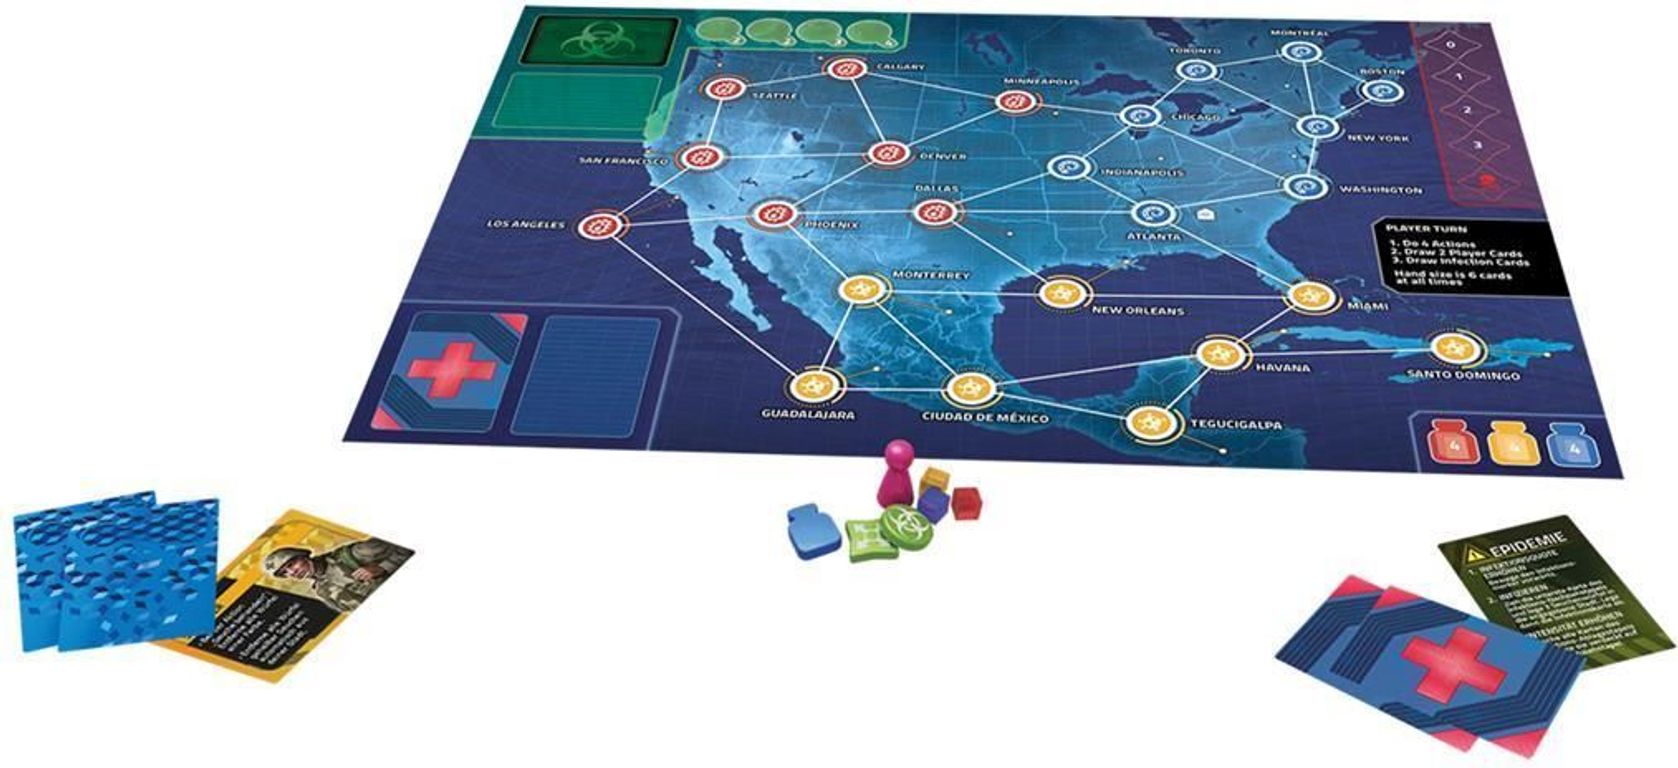 Pandemic: Hot Zone - North America components